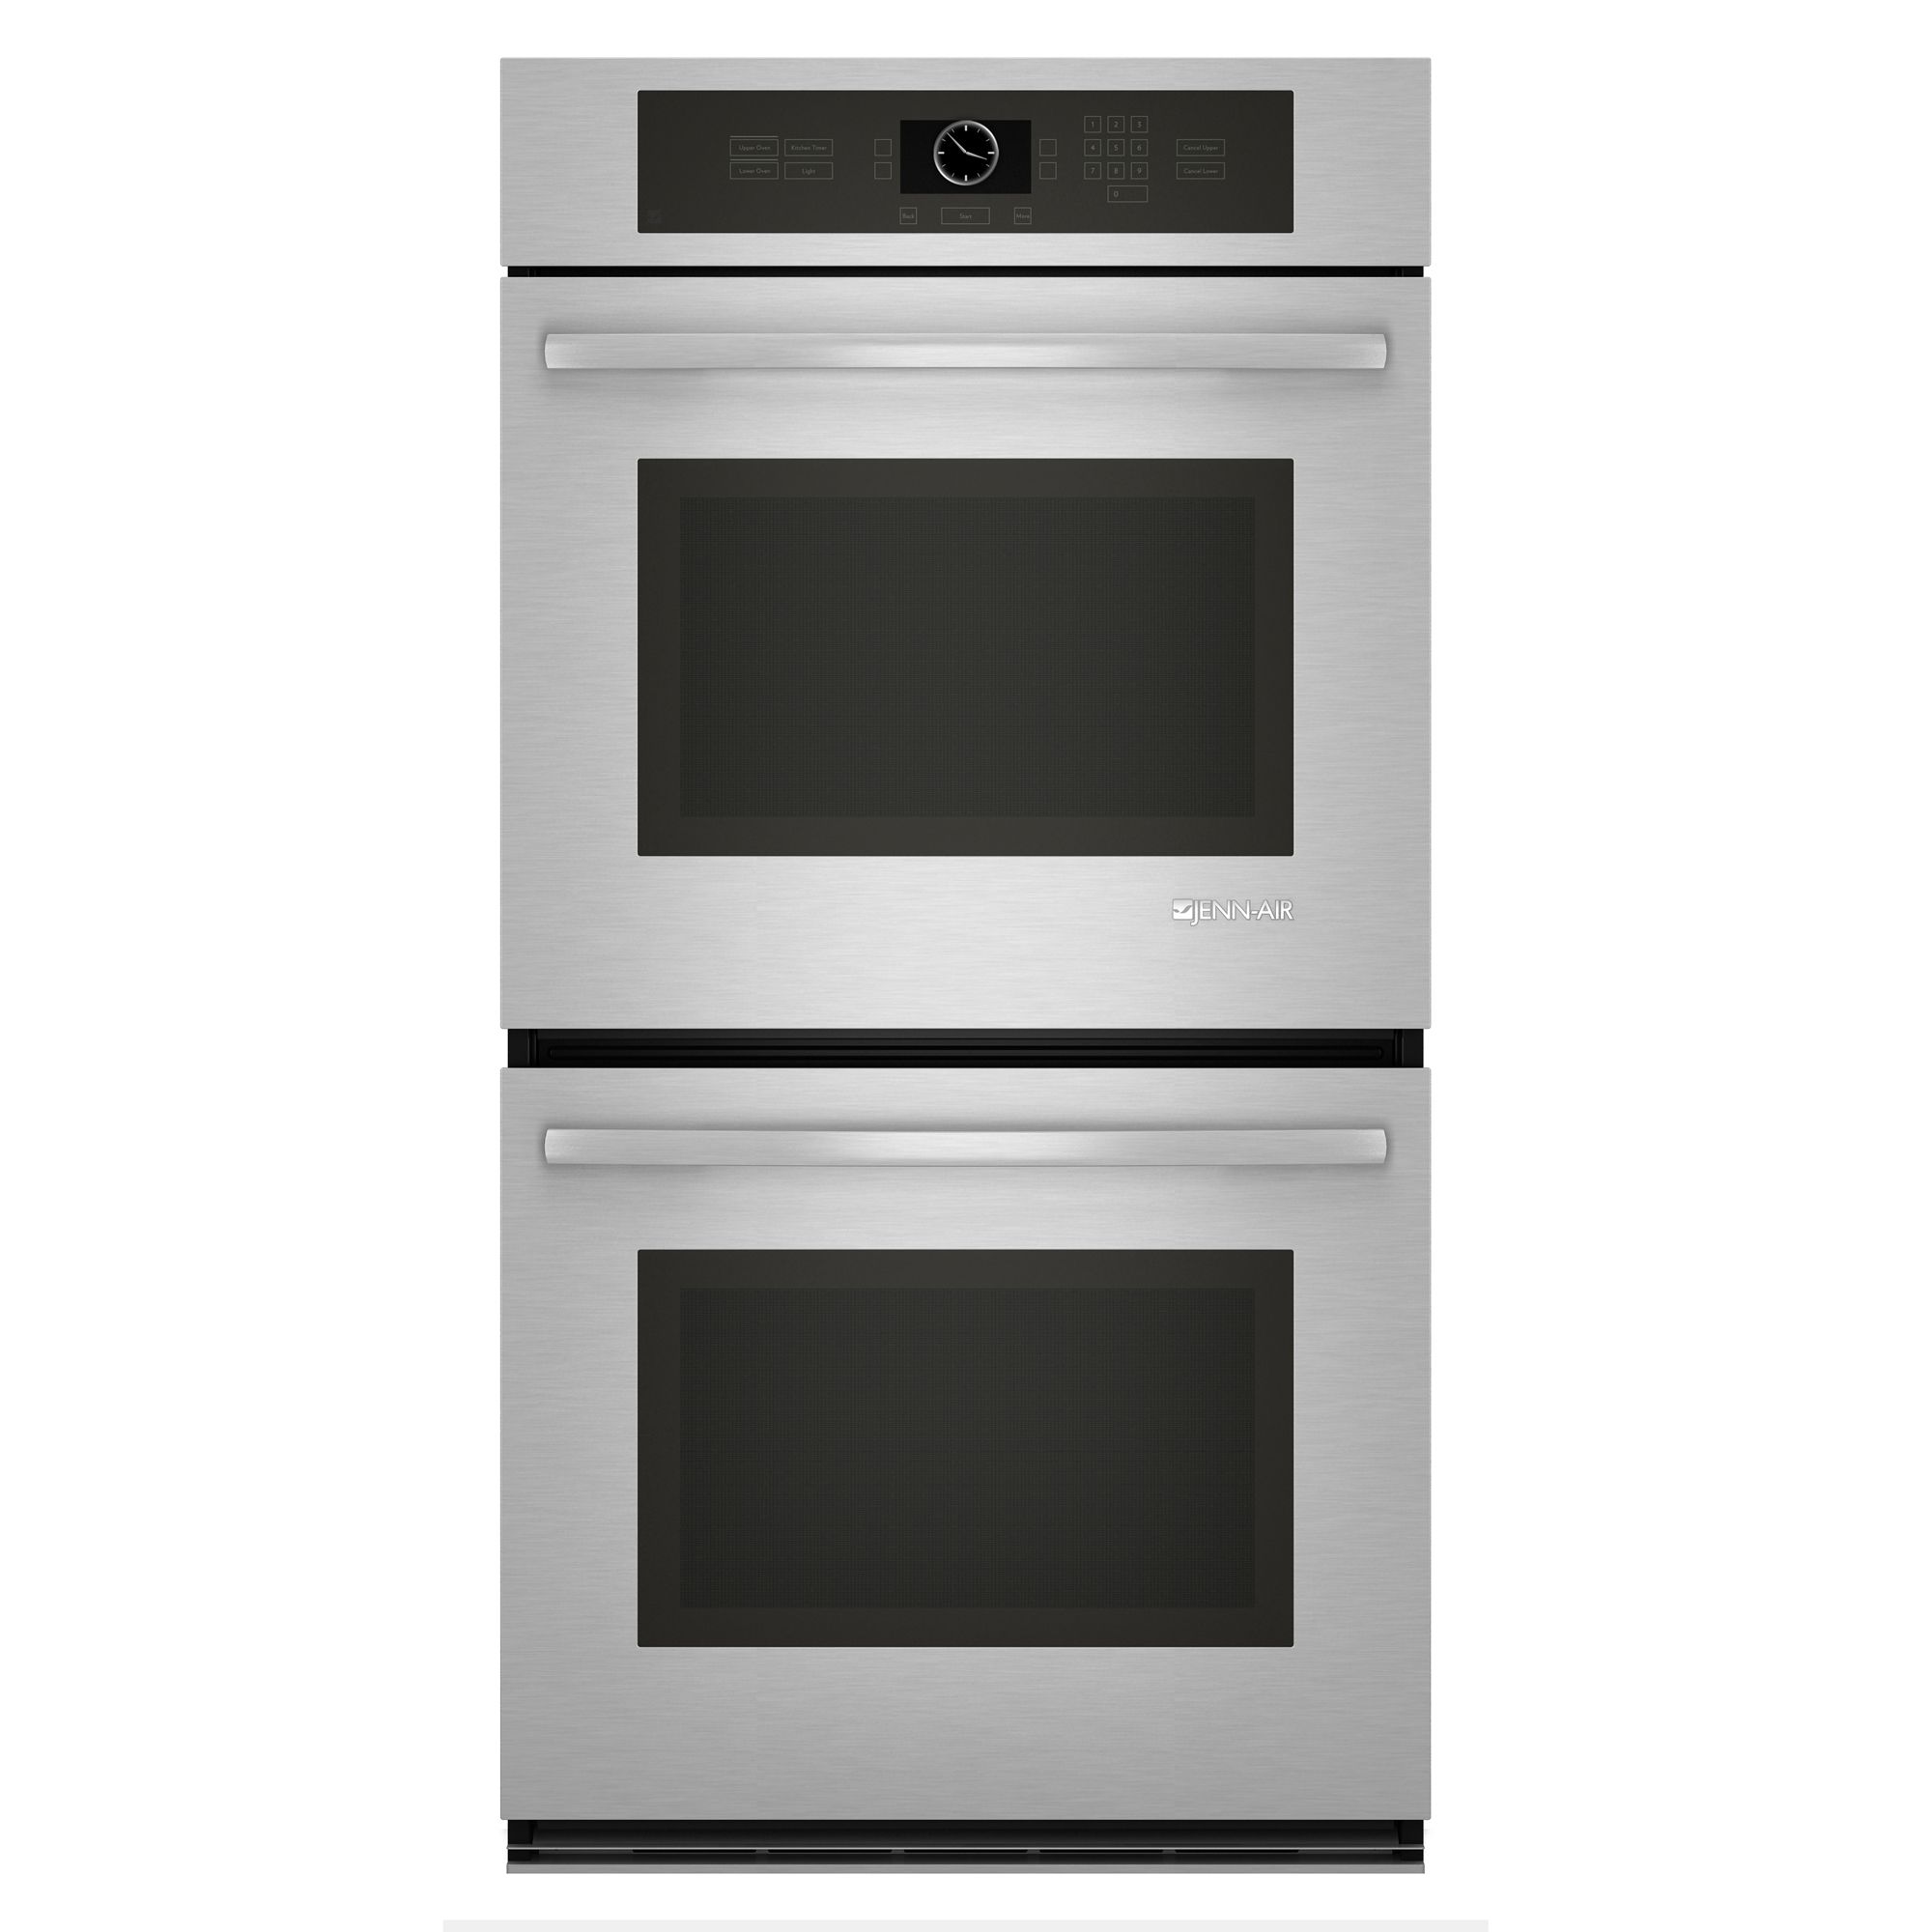 27" Electric Built-In Double Wall Oven logo